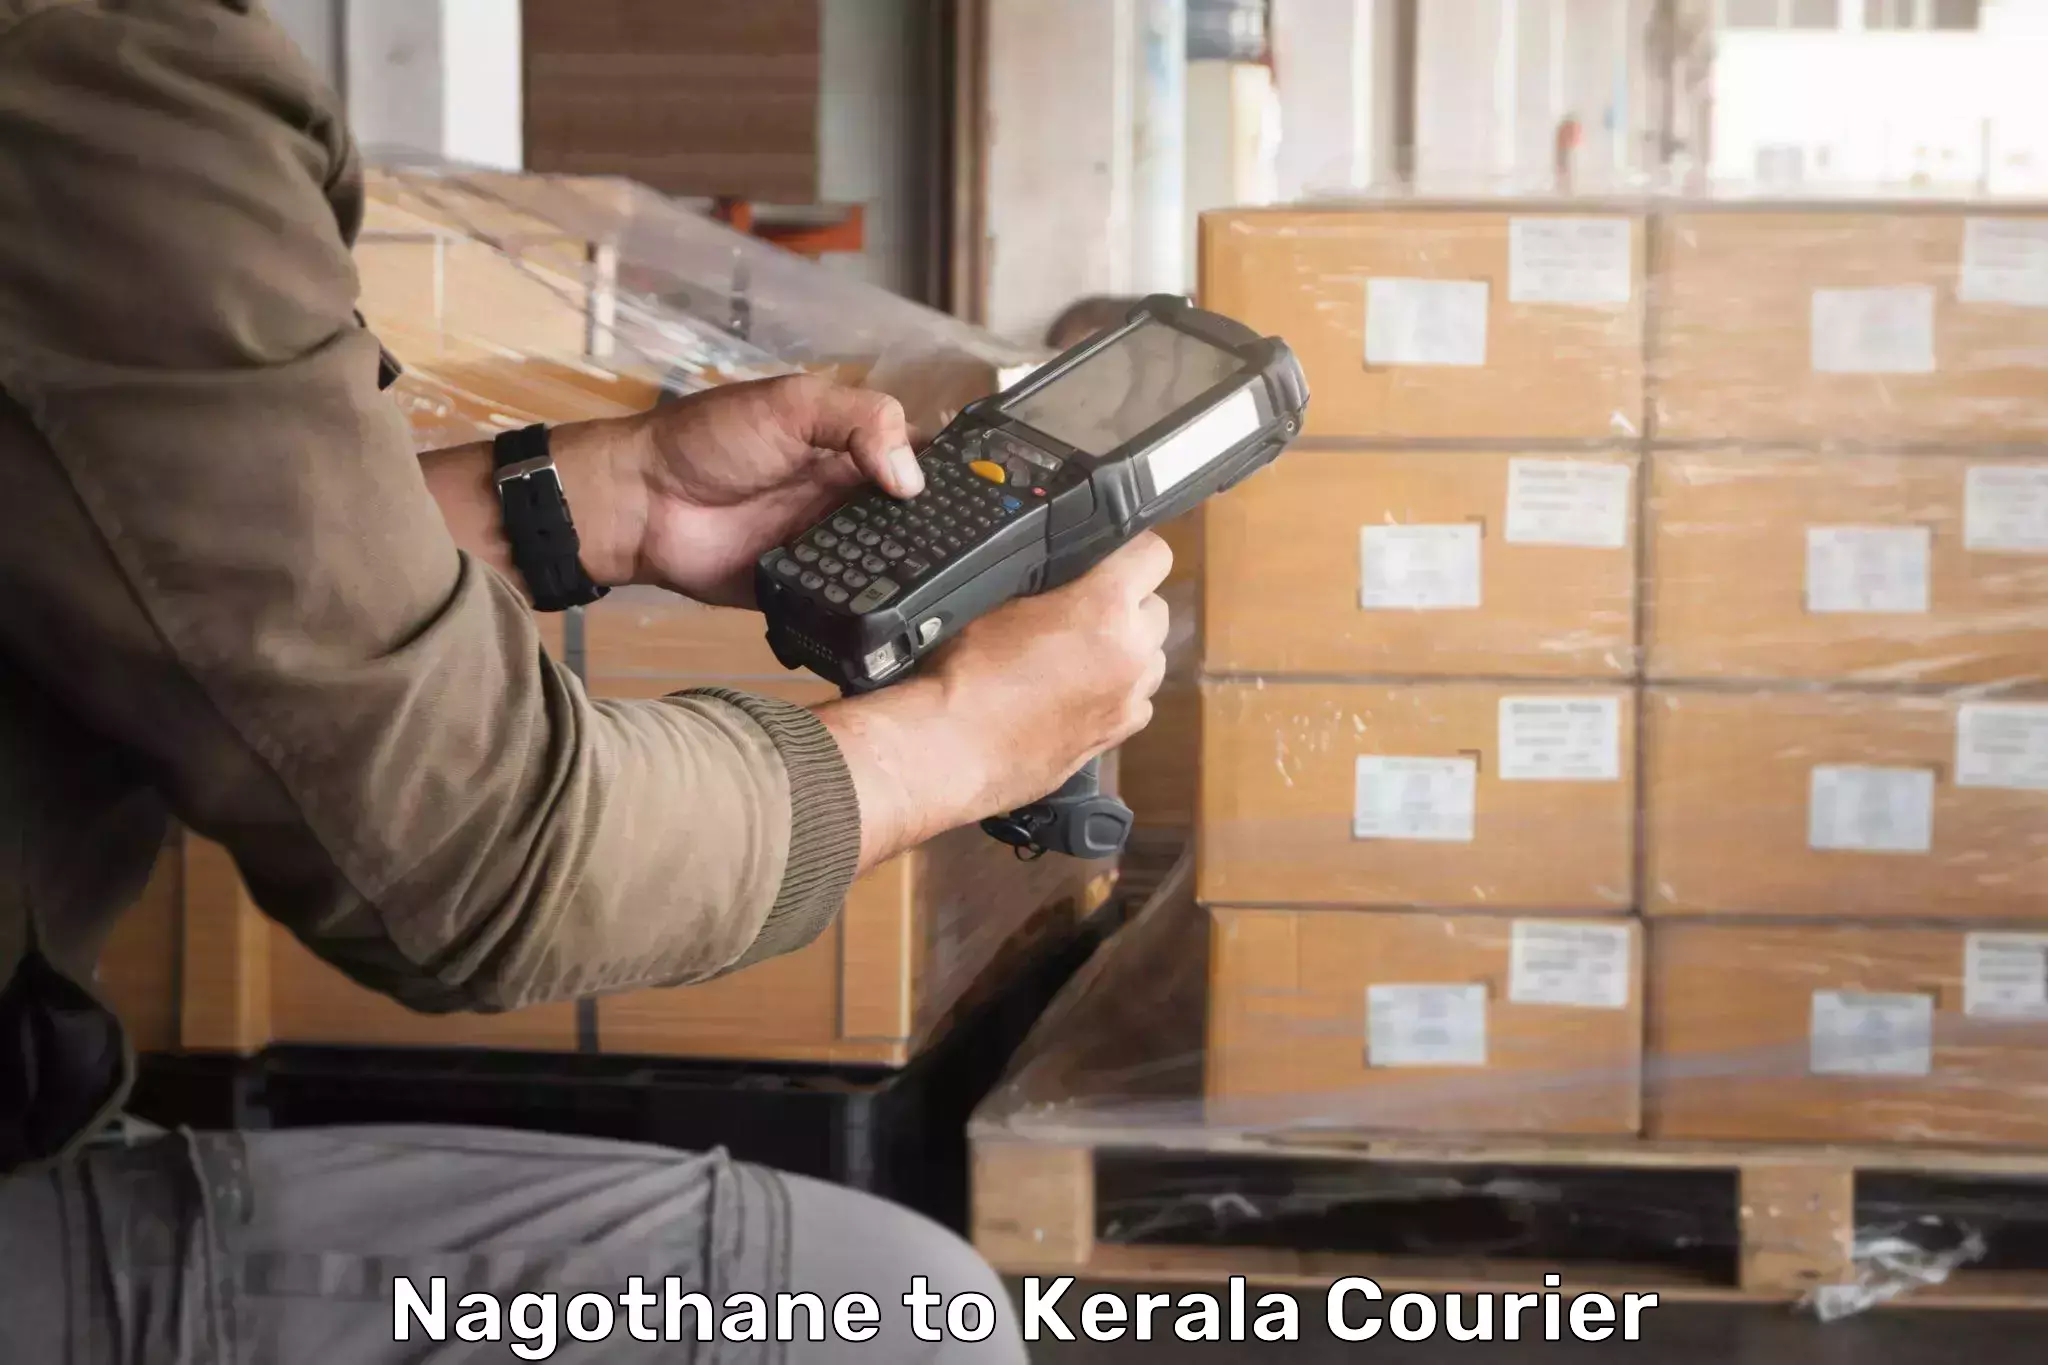 On-demand delivery Nagothane to Kerala